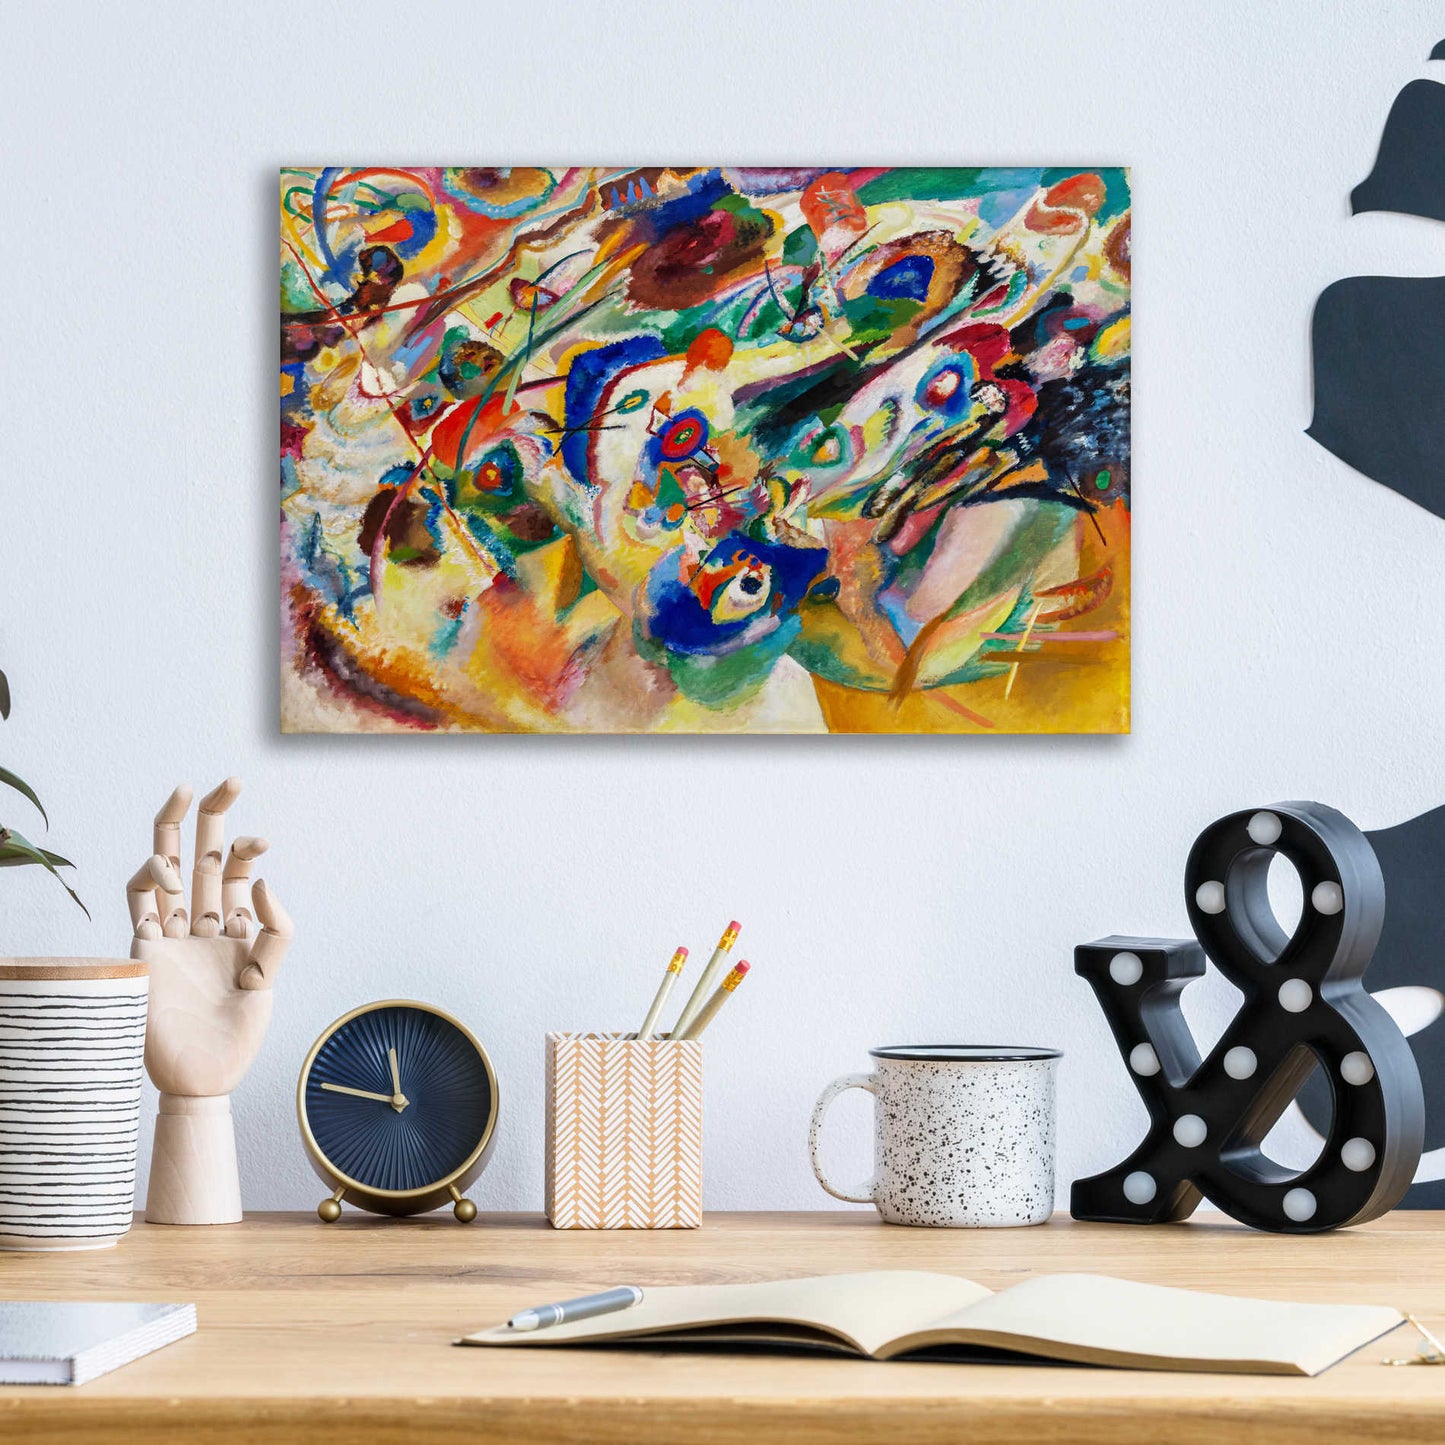 Epic Art 'Sketch 2 for Composition VII' by Wassily Kandinsky, Acrylic Glass Wall Art,16x12